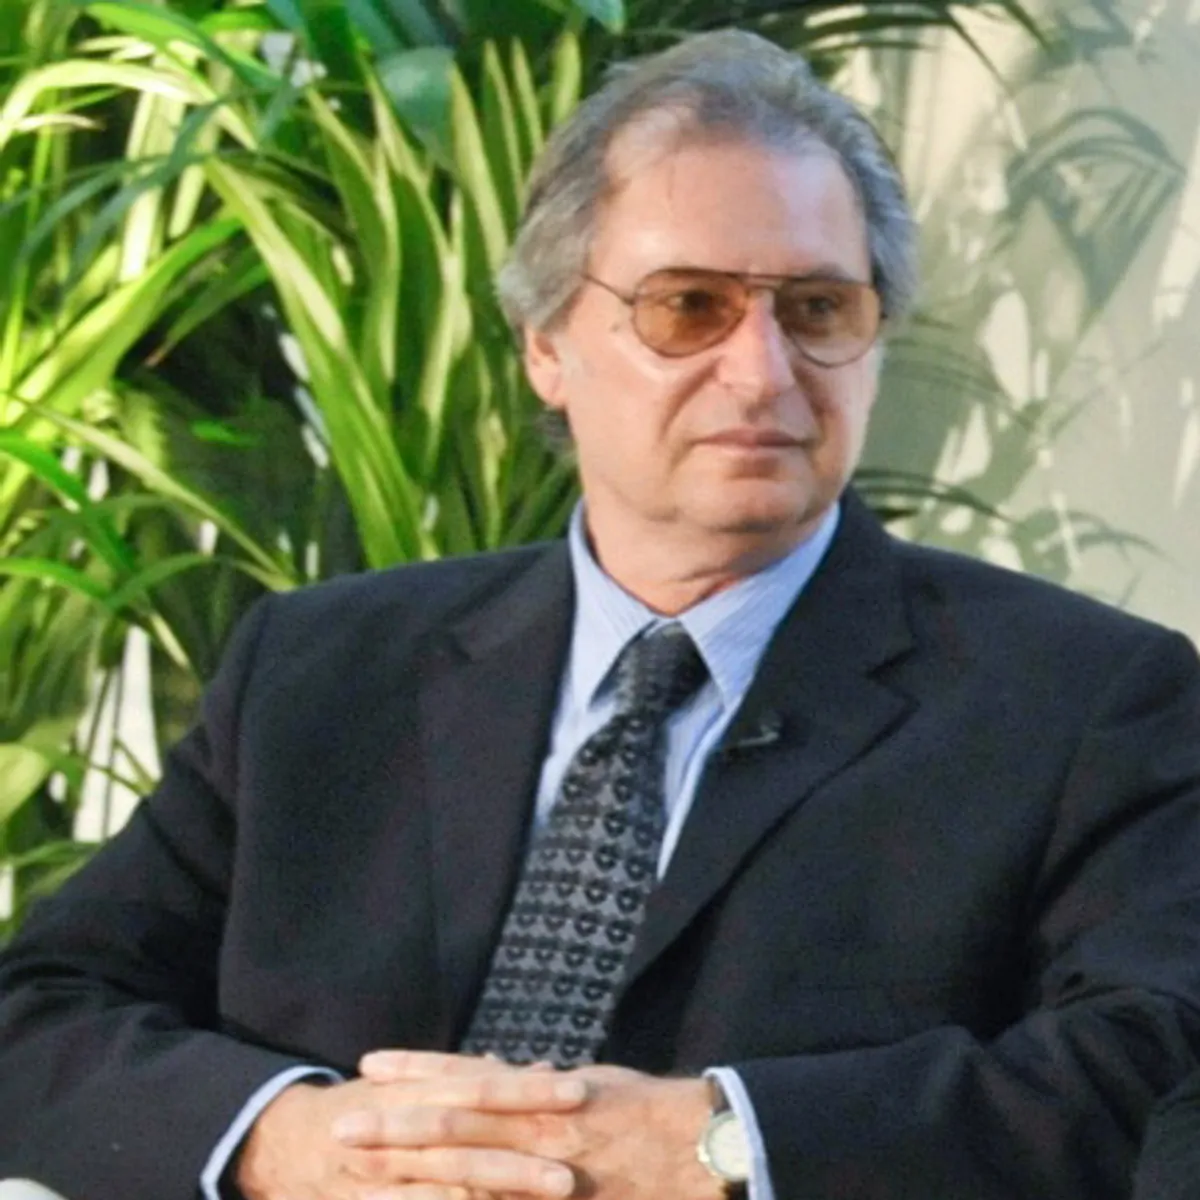 A man with glasses and grey hair sits.